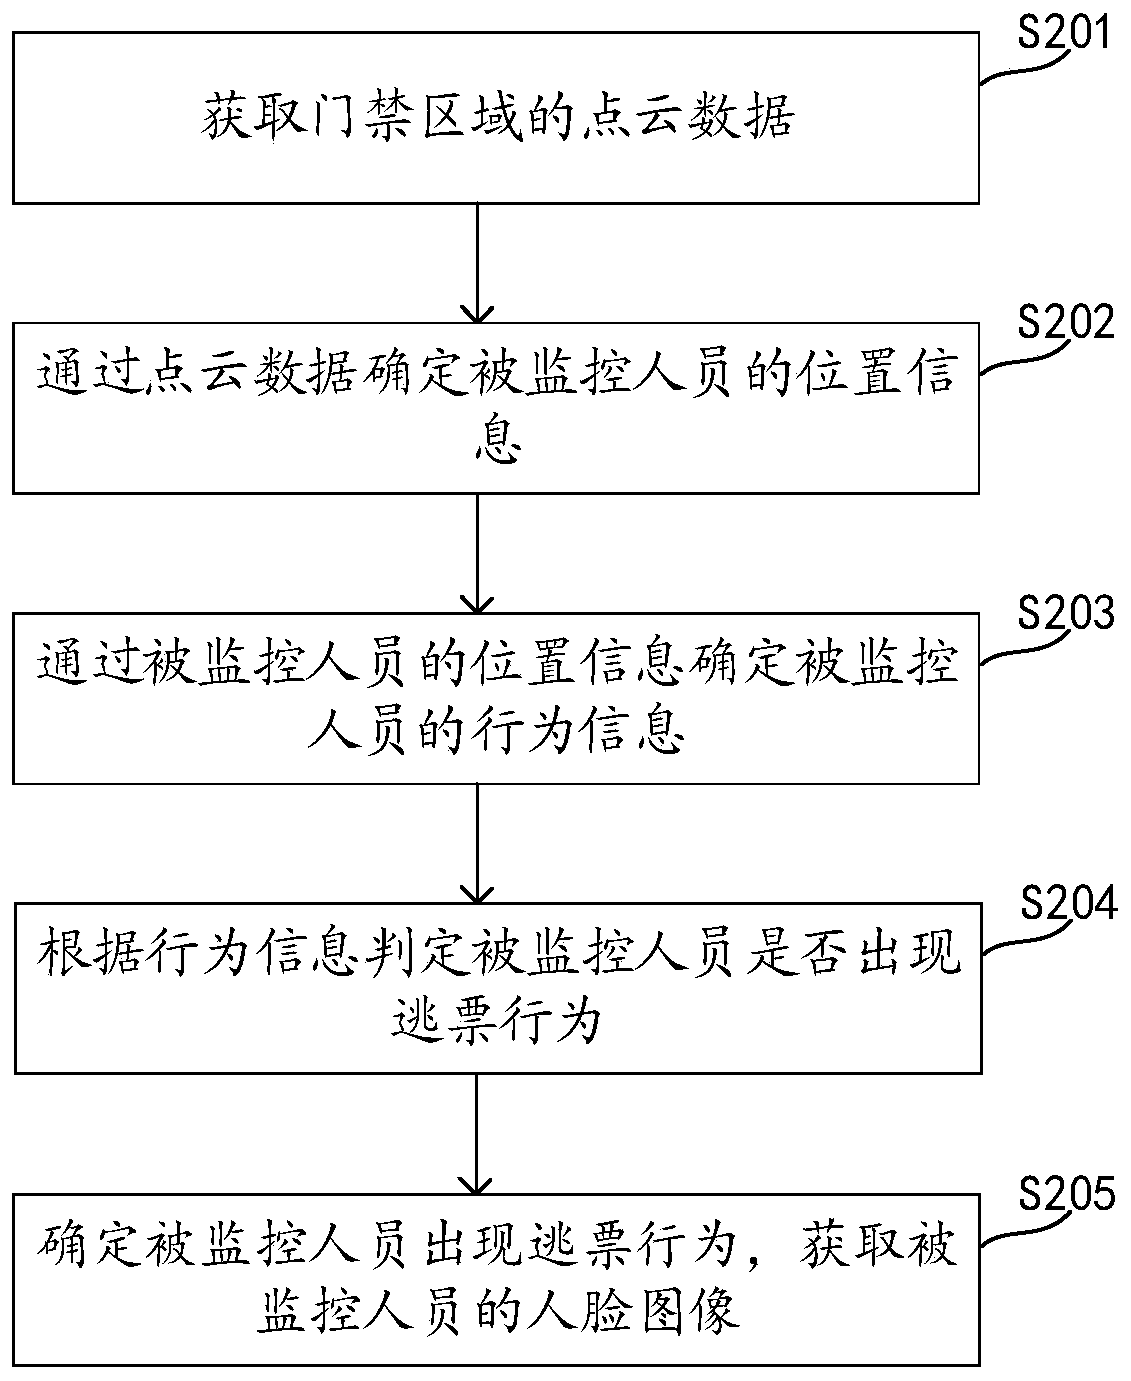 Fare evasion detection method and related device